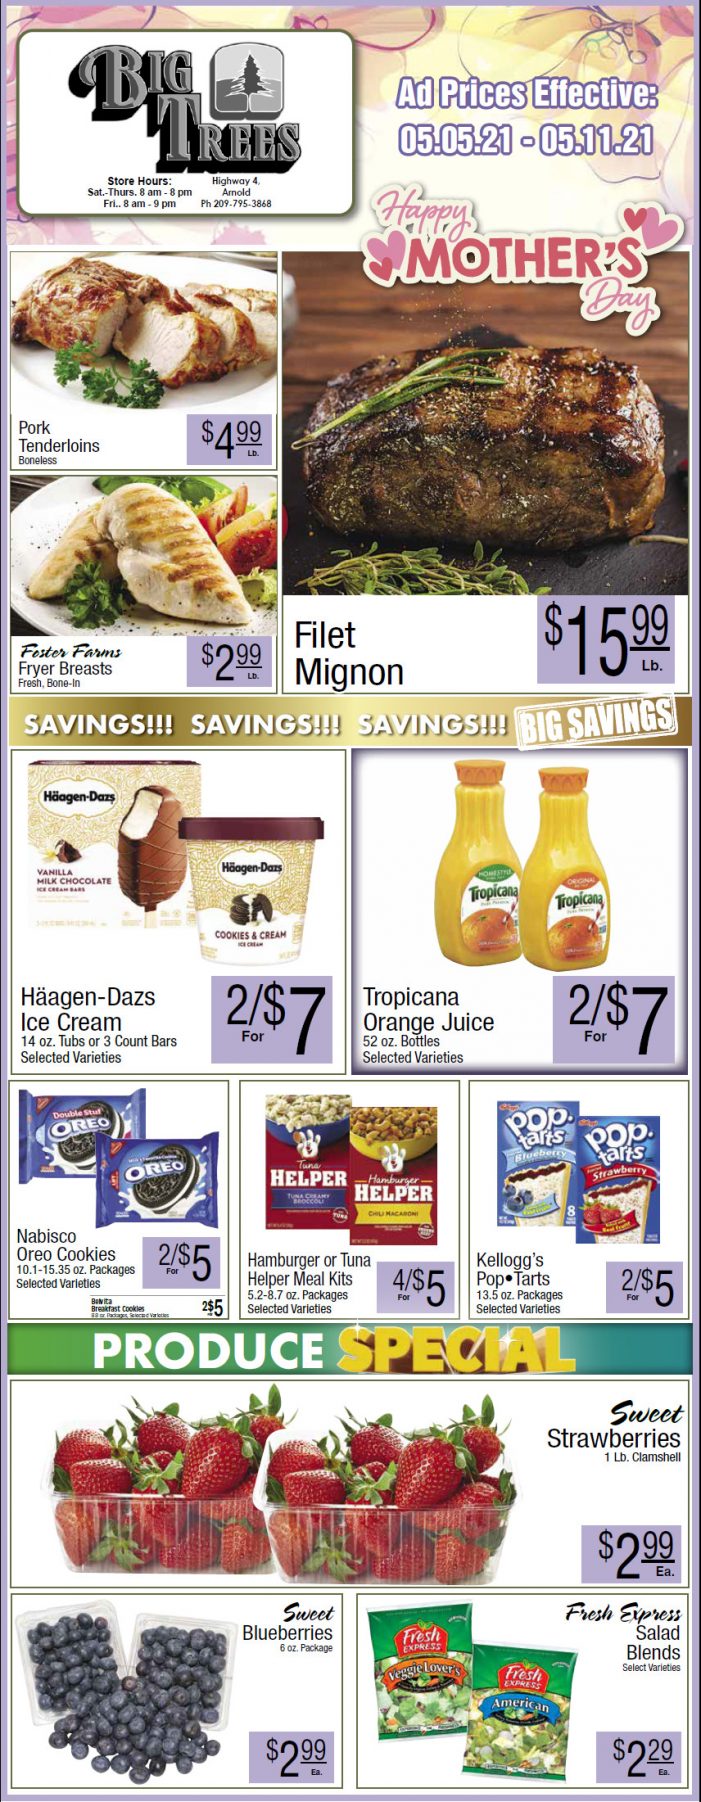 Big Trees Market Weekly Ad & Grocery Specials Through May 11th!  Shop Local & Save!!